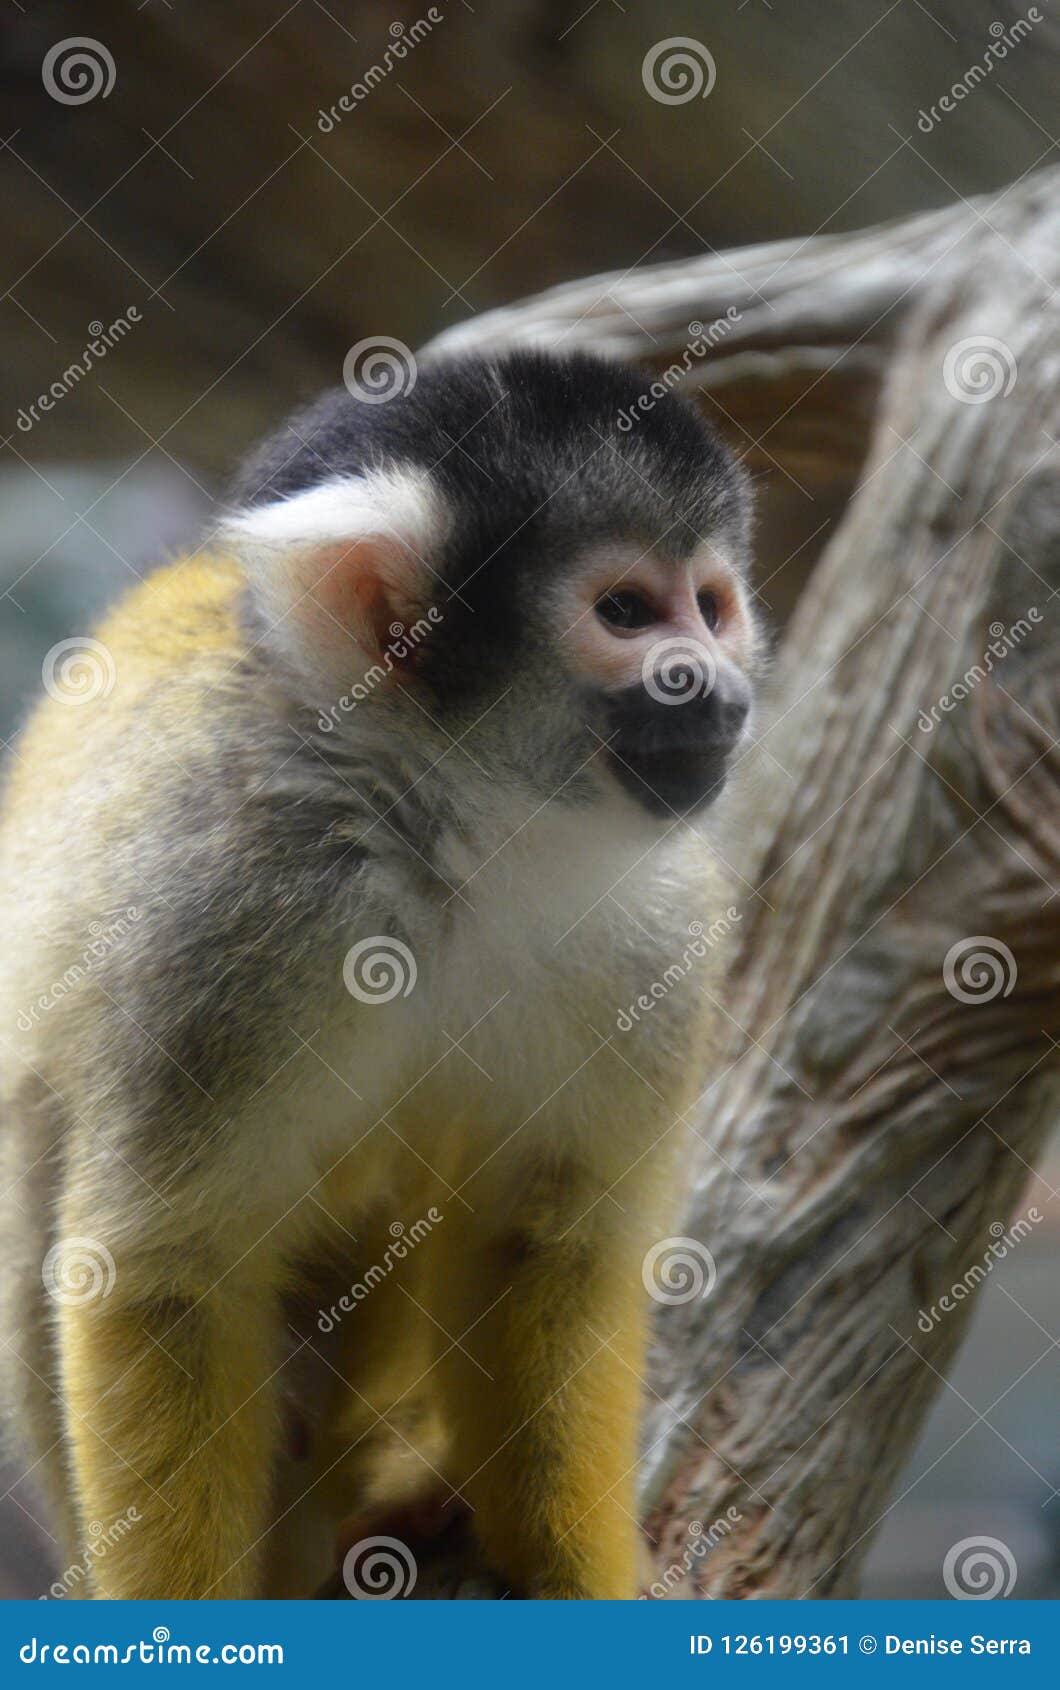 close-up of a common squirrel monkey